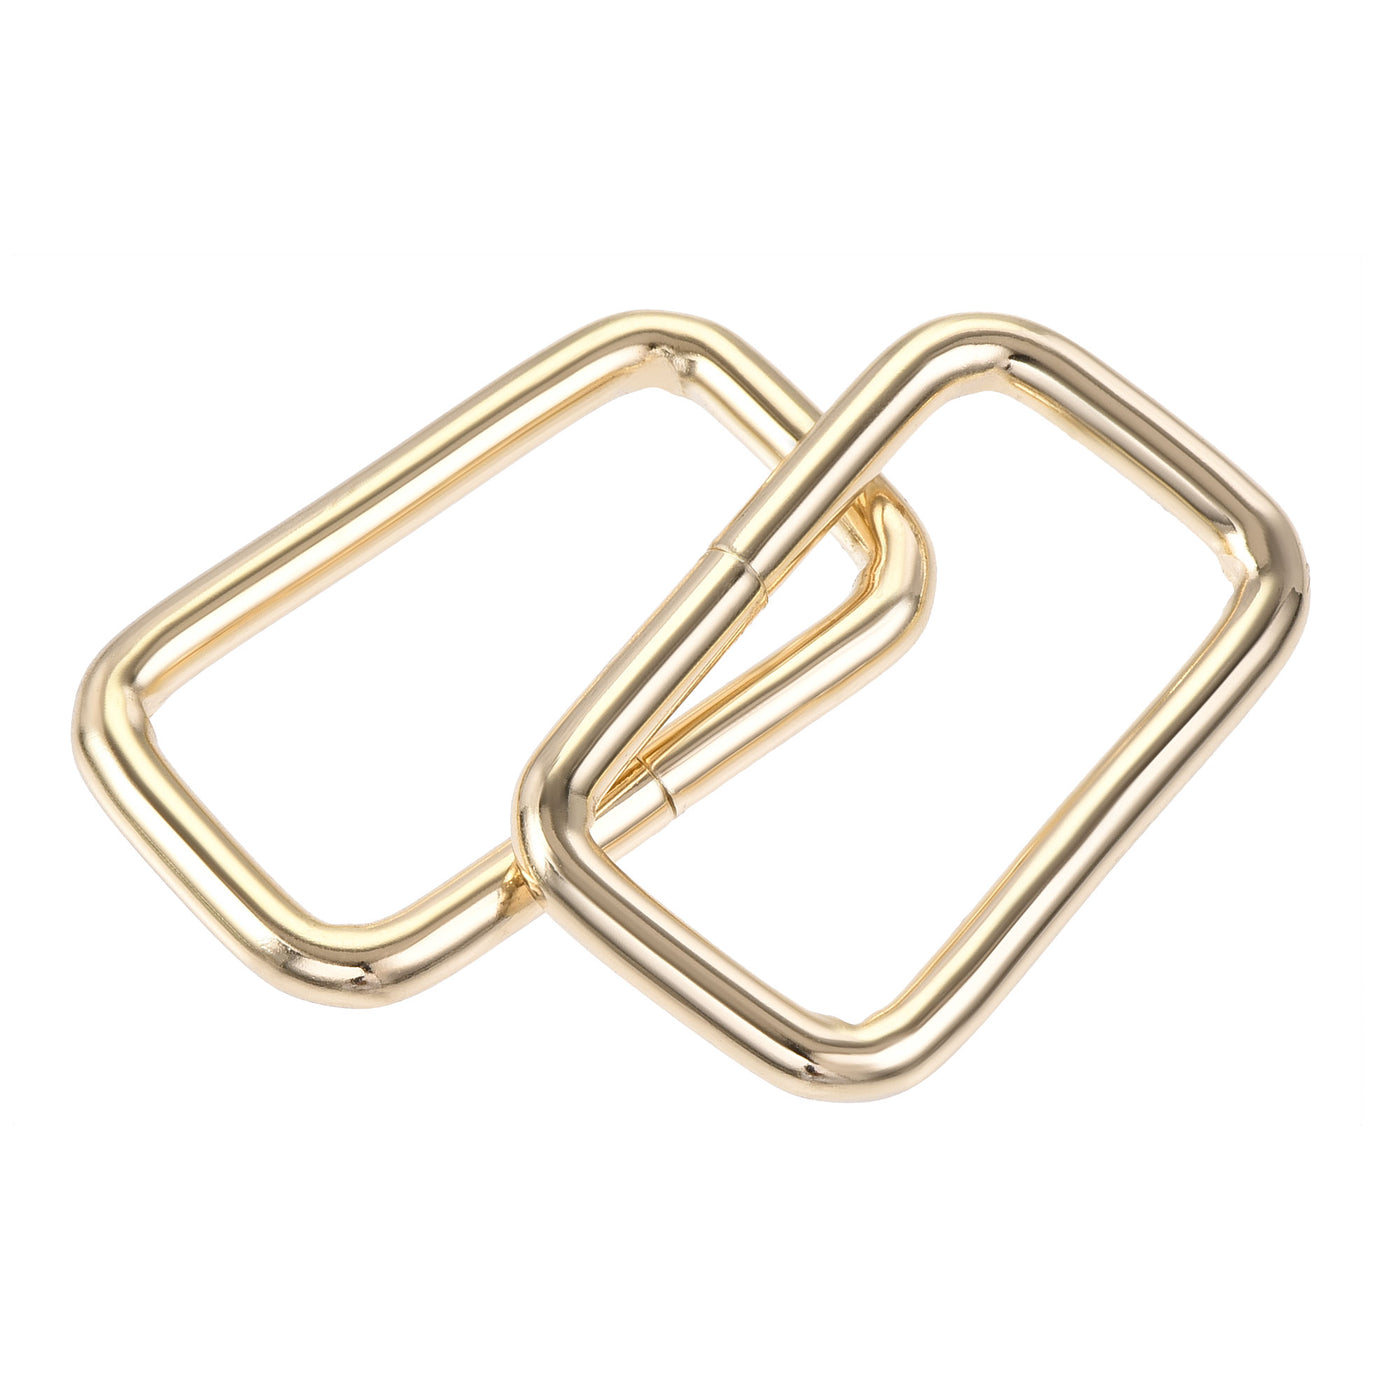 uxcell Uxcell Metal Rectangle Ring Buckles 38x20mm for Bags Belts DIY Gold Tone 20pcs